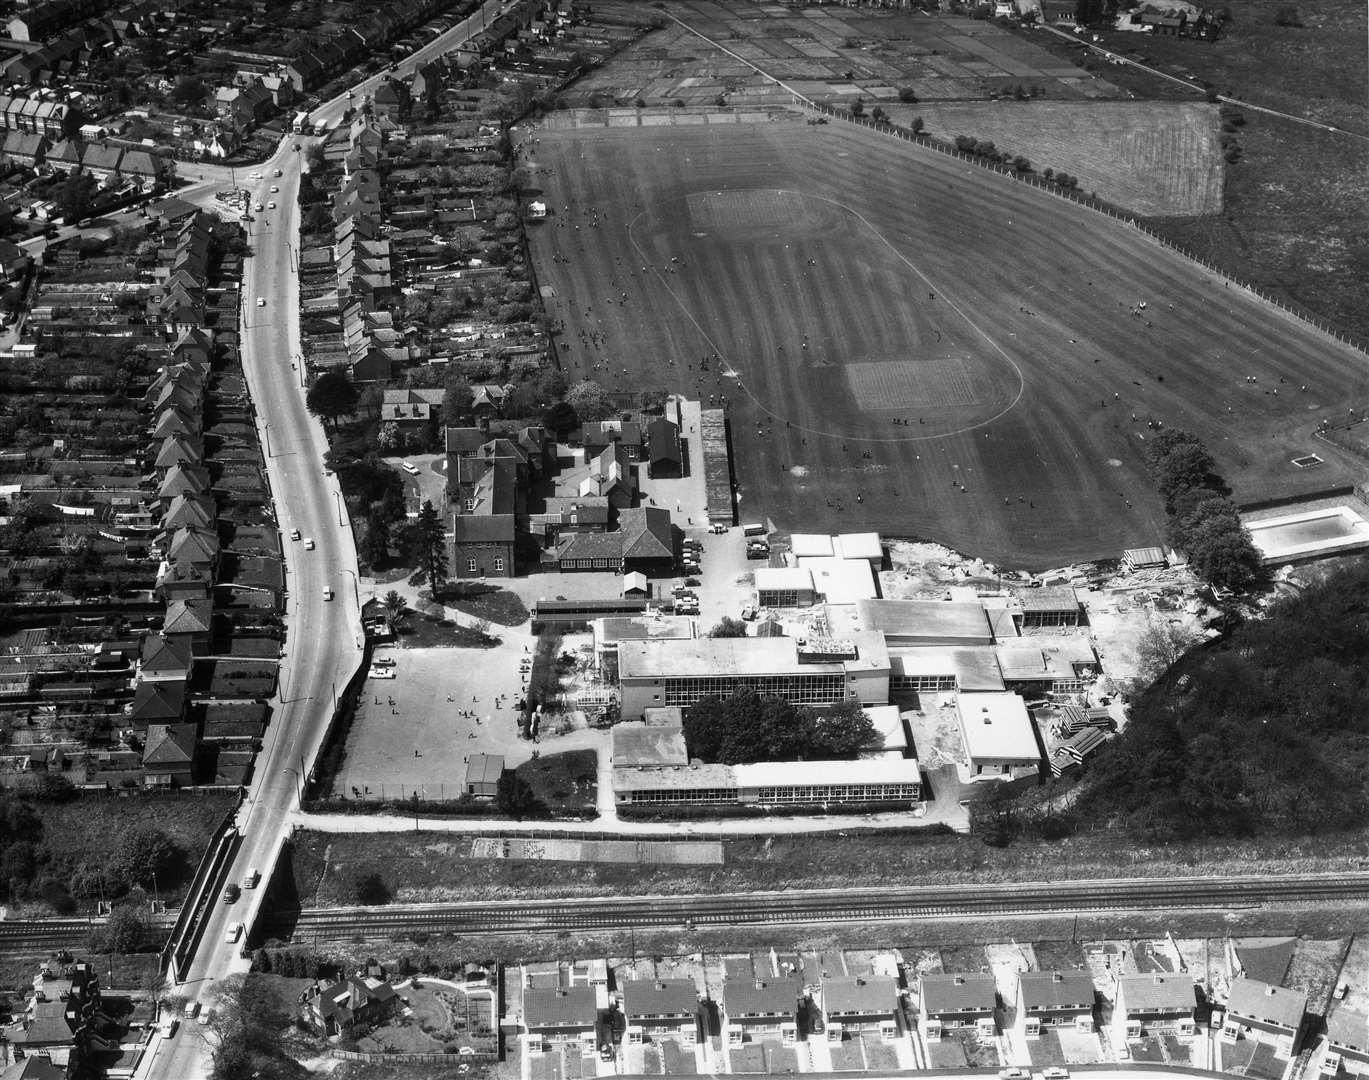 Norton Knatchbull School, and Hythe Road, in 1967. The school's building was constructed in the 1950s and was renovated in 2015 as part of a major overhaul